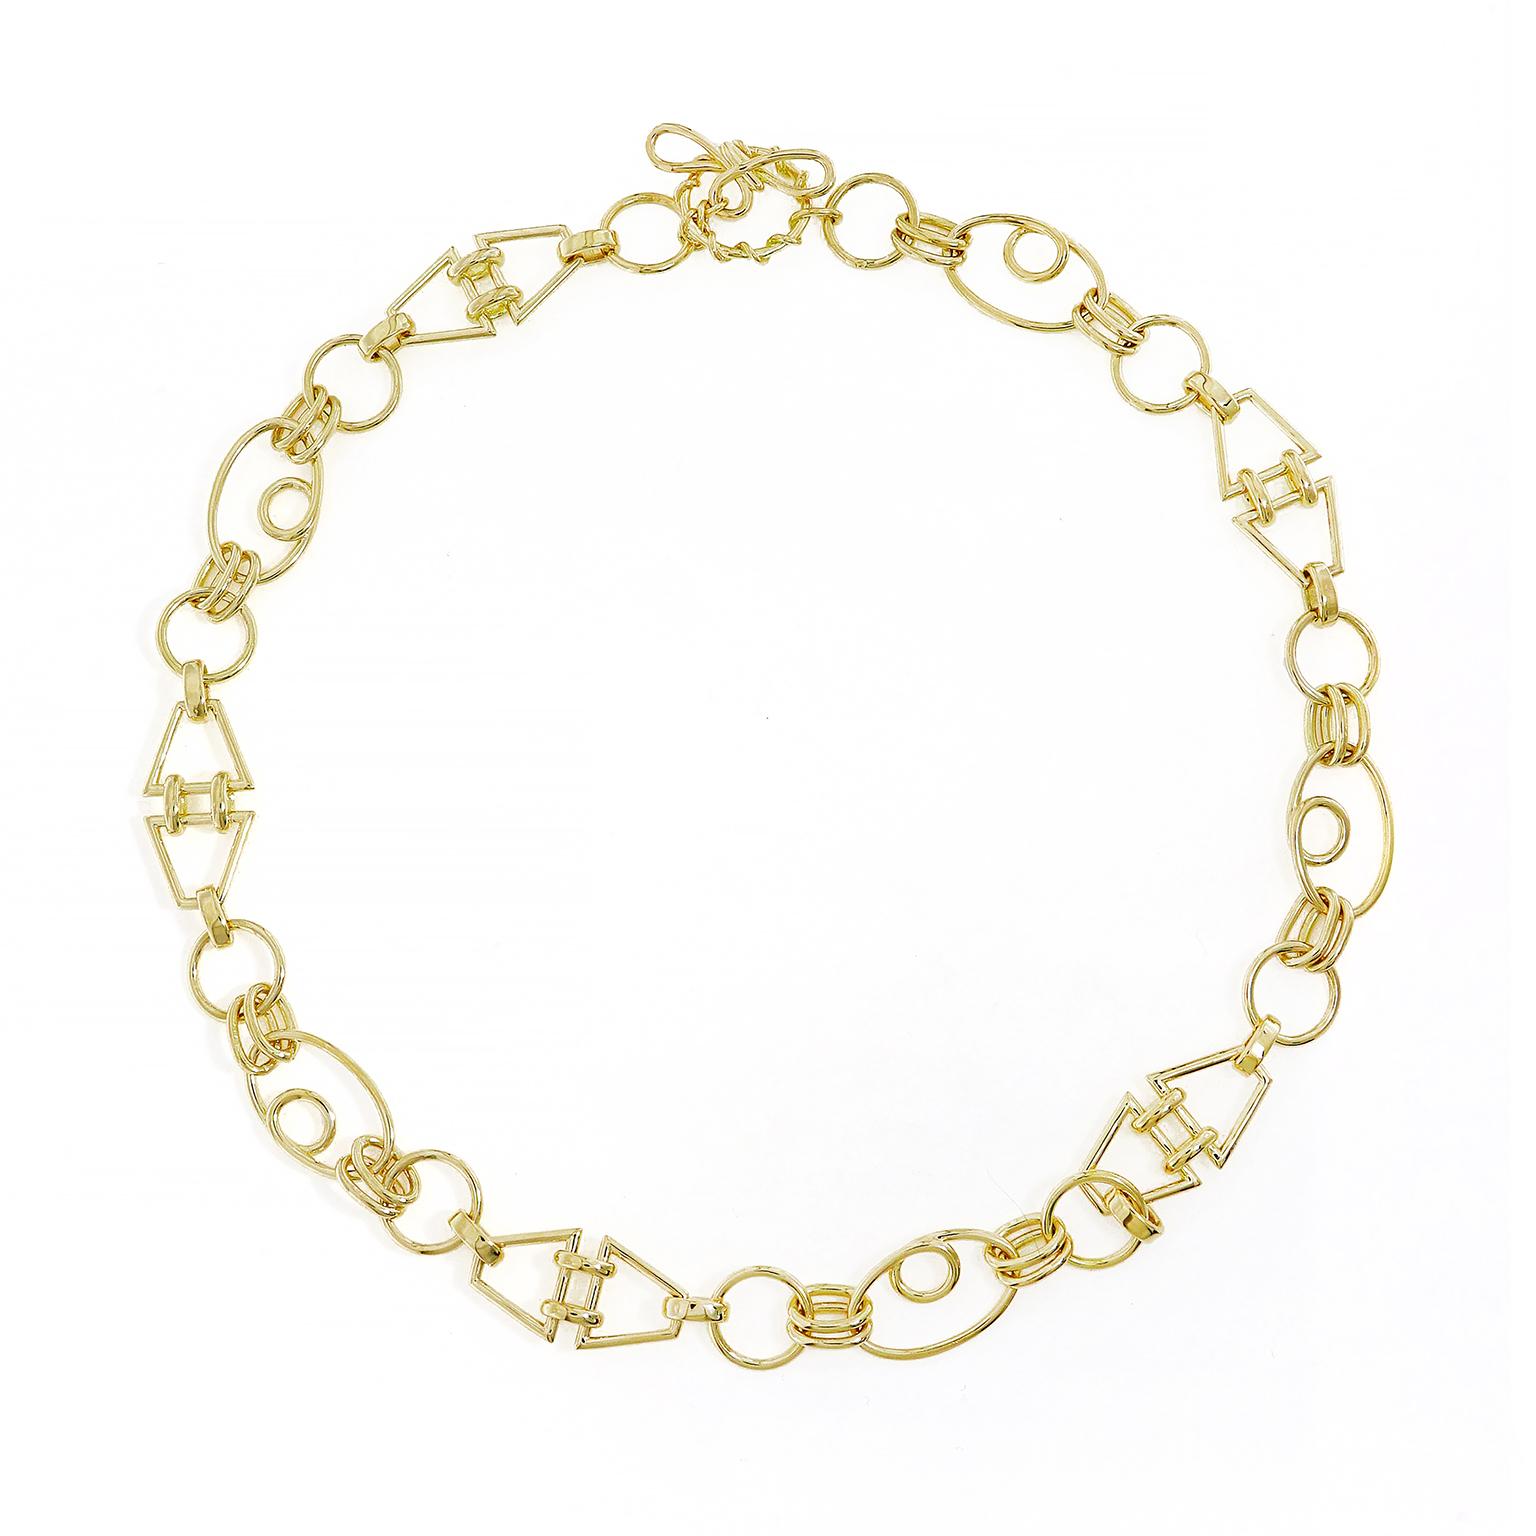 An eclectic arrangement of 18k yellow gold shapes are linked together. The pattern consists of a single circle which is connected by a pair of circles to an oval with a smaller circle in its center. Duos of parallel trapezoids are connected in